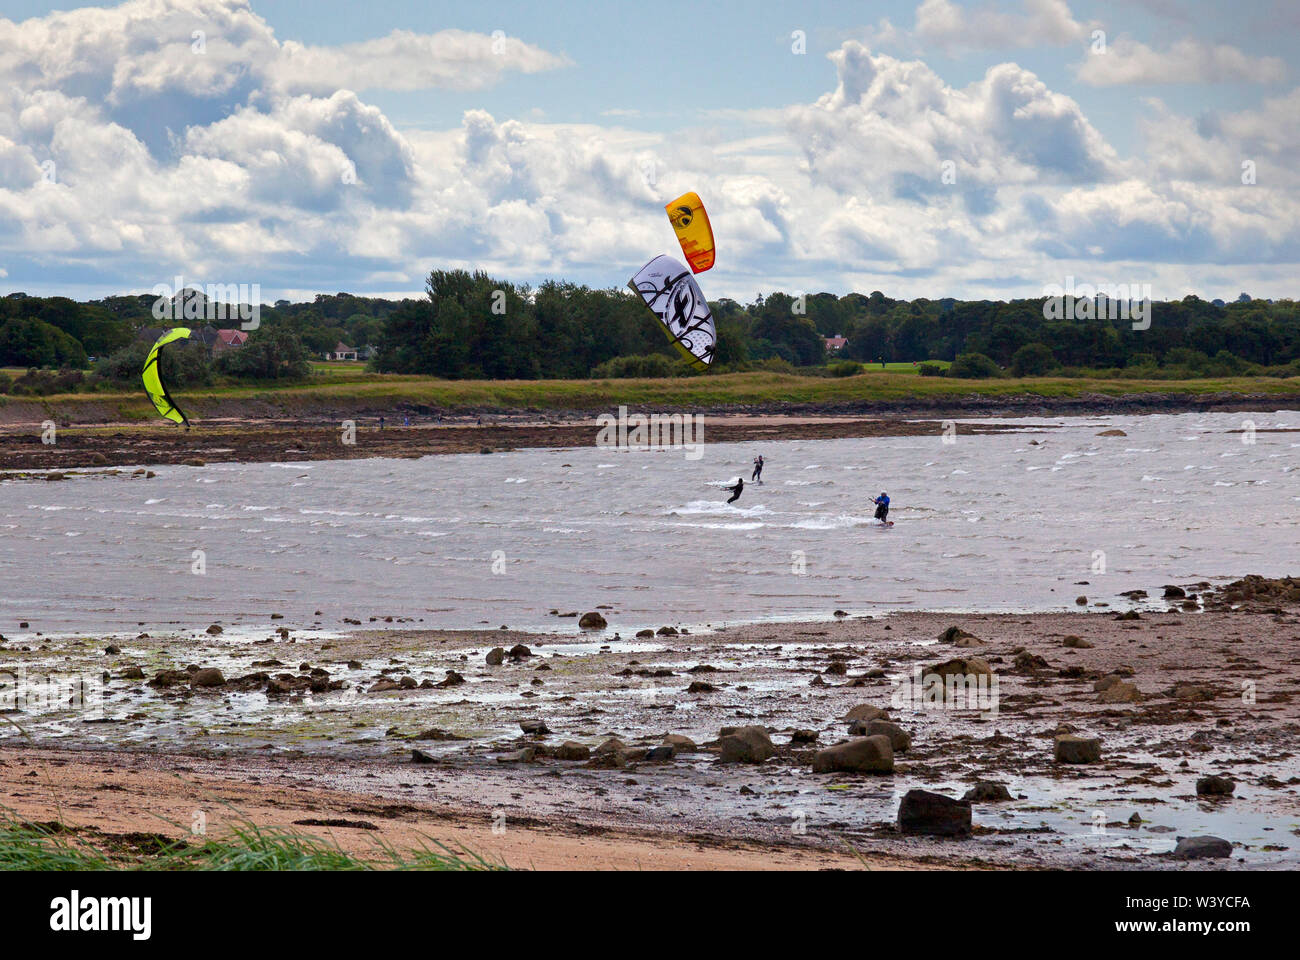 Longniddry Bents, East Lothian, Scotland. UK. 18th July 2019. Kitesurfers make the best of the sunny and windy but changeable conditions with 27km/h winds and potential gusts of 49 km/h, great skill was demonstrated as they passed close by each other without their kites becoming tangled up. Stock Photo